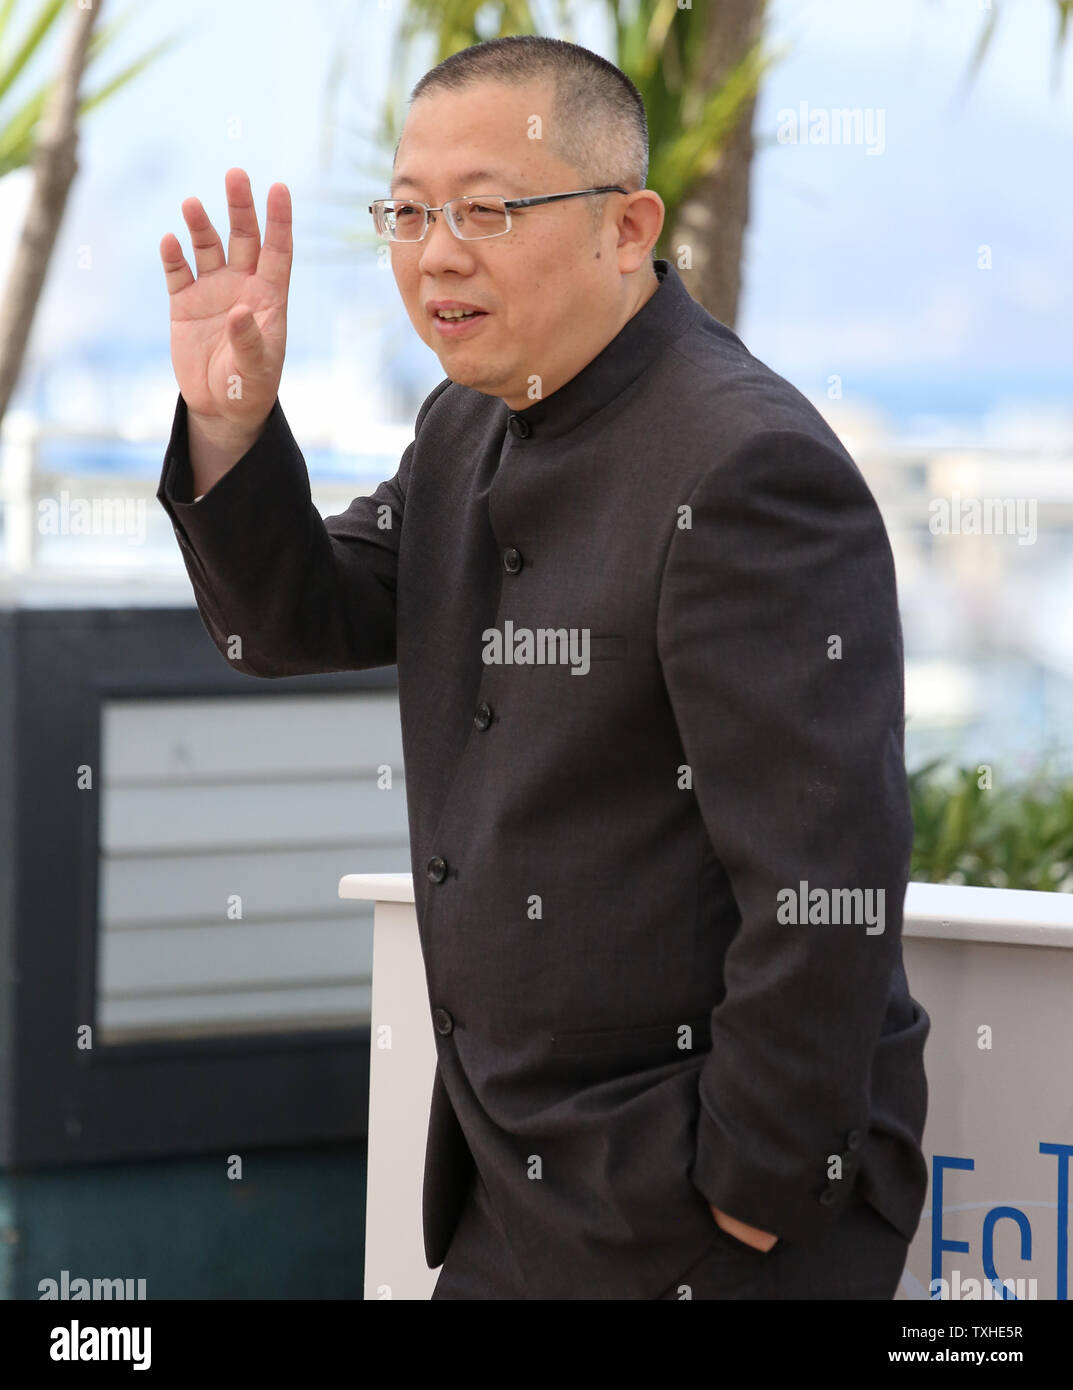 Chao Wang arrives at a photo call for the film 'Fantasia' during the 67th annual Cannes International Film Festival in Cannes, France on May 21, 2014.   UPI/David Silpa Stock Photo